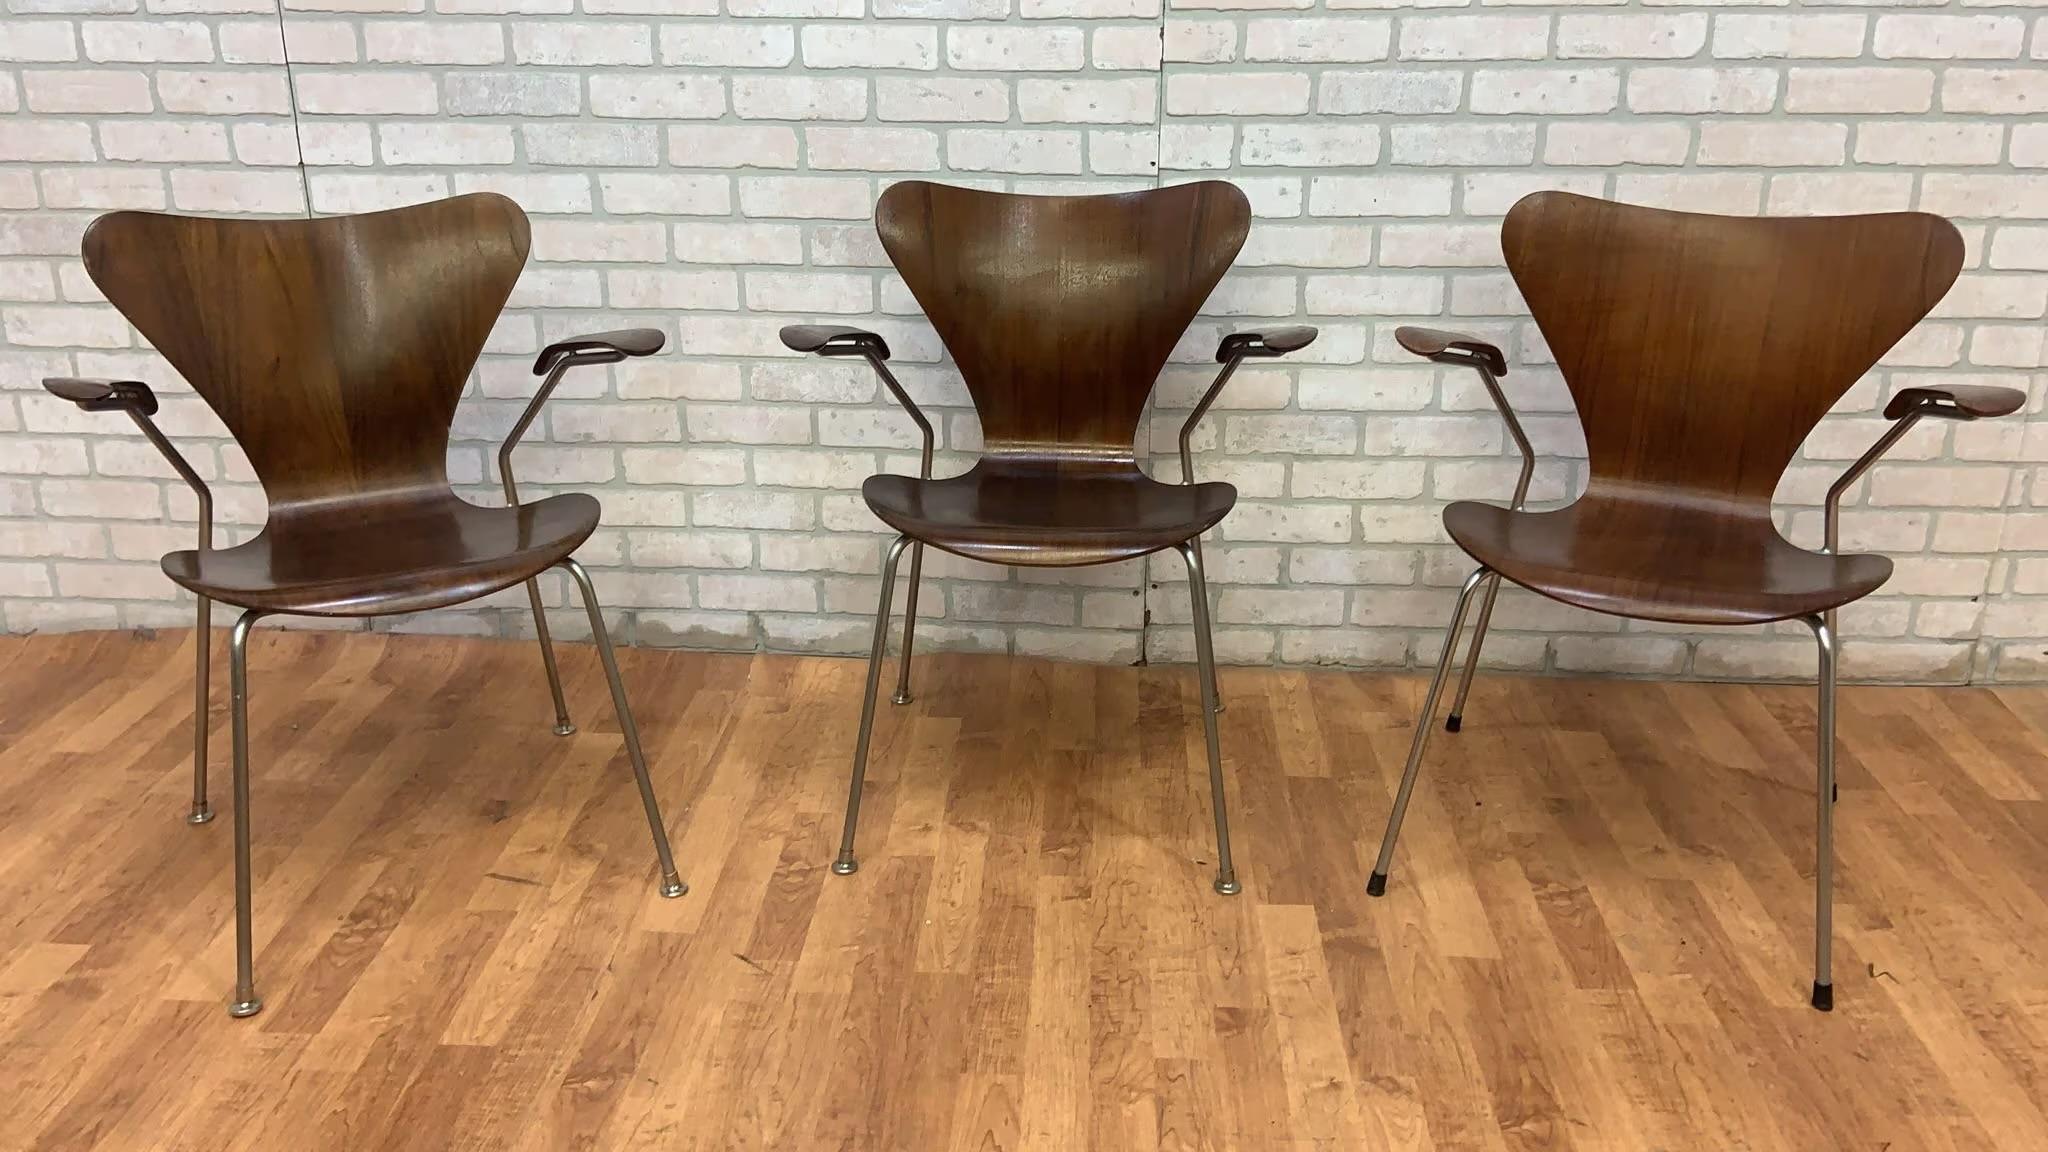 Metal Series 7 Butterfly Teak Armchairs by Arne Jacobsen for Fritz Hansen - Set of 3 For Sale